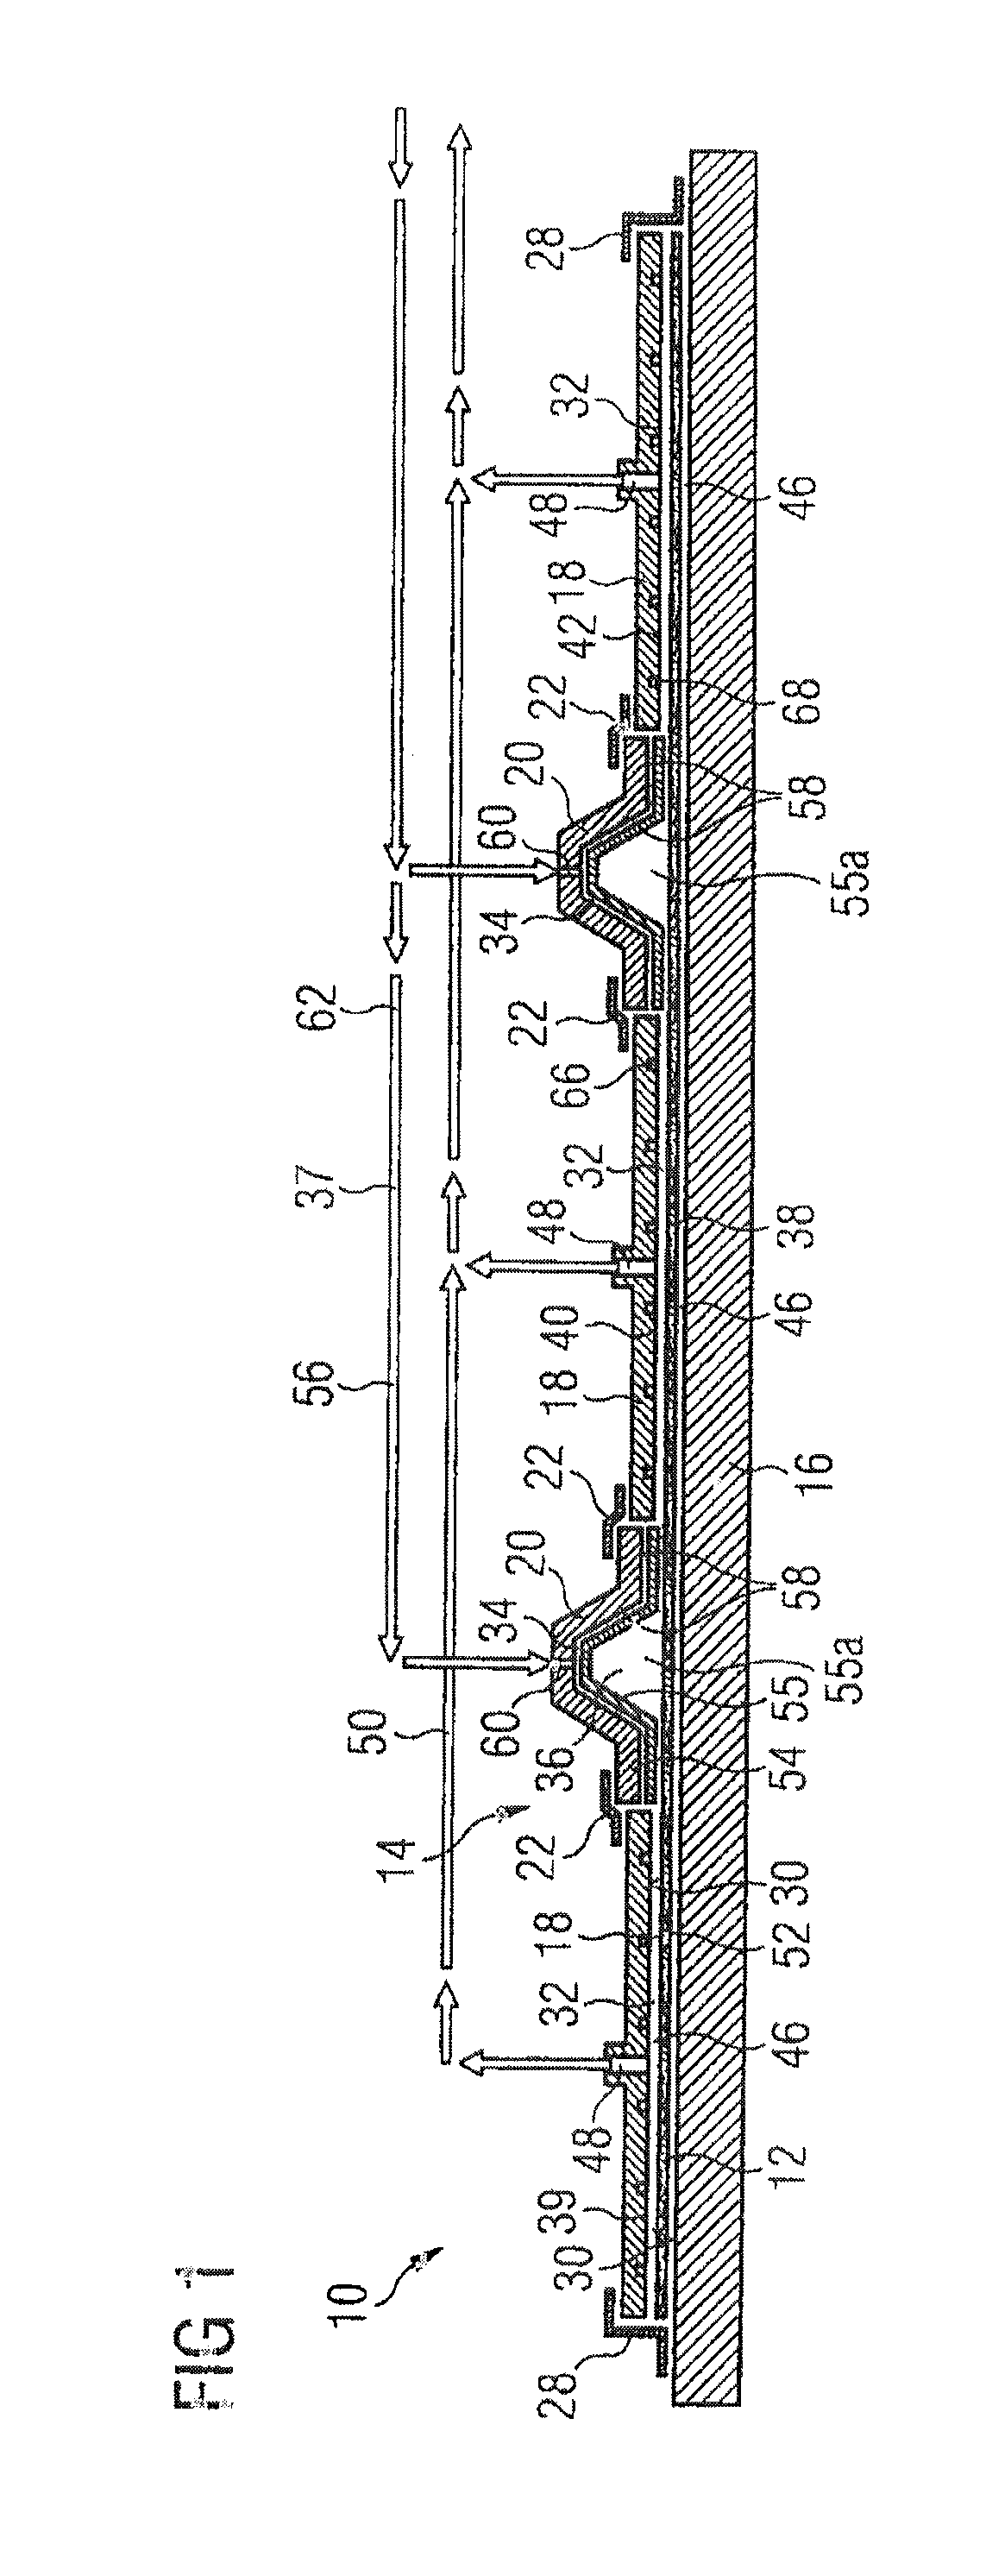 Mold for Producing Fiber-Reinforced Components